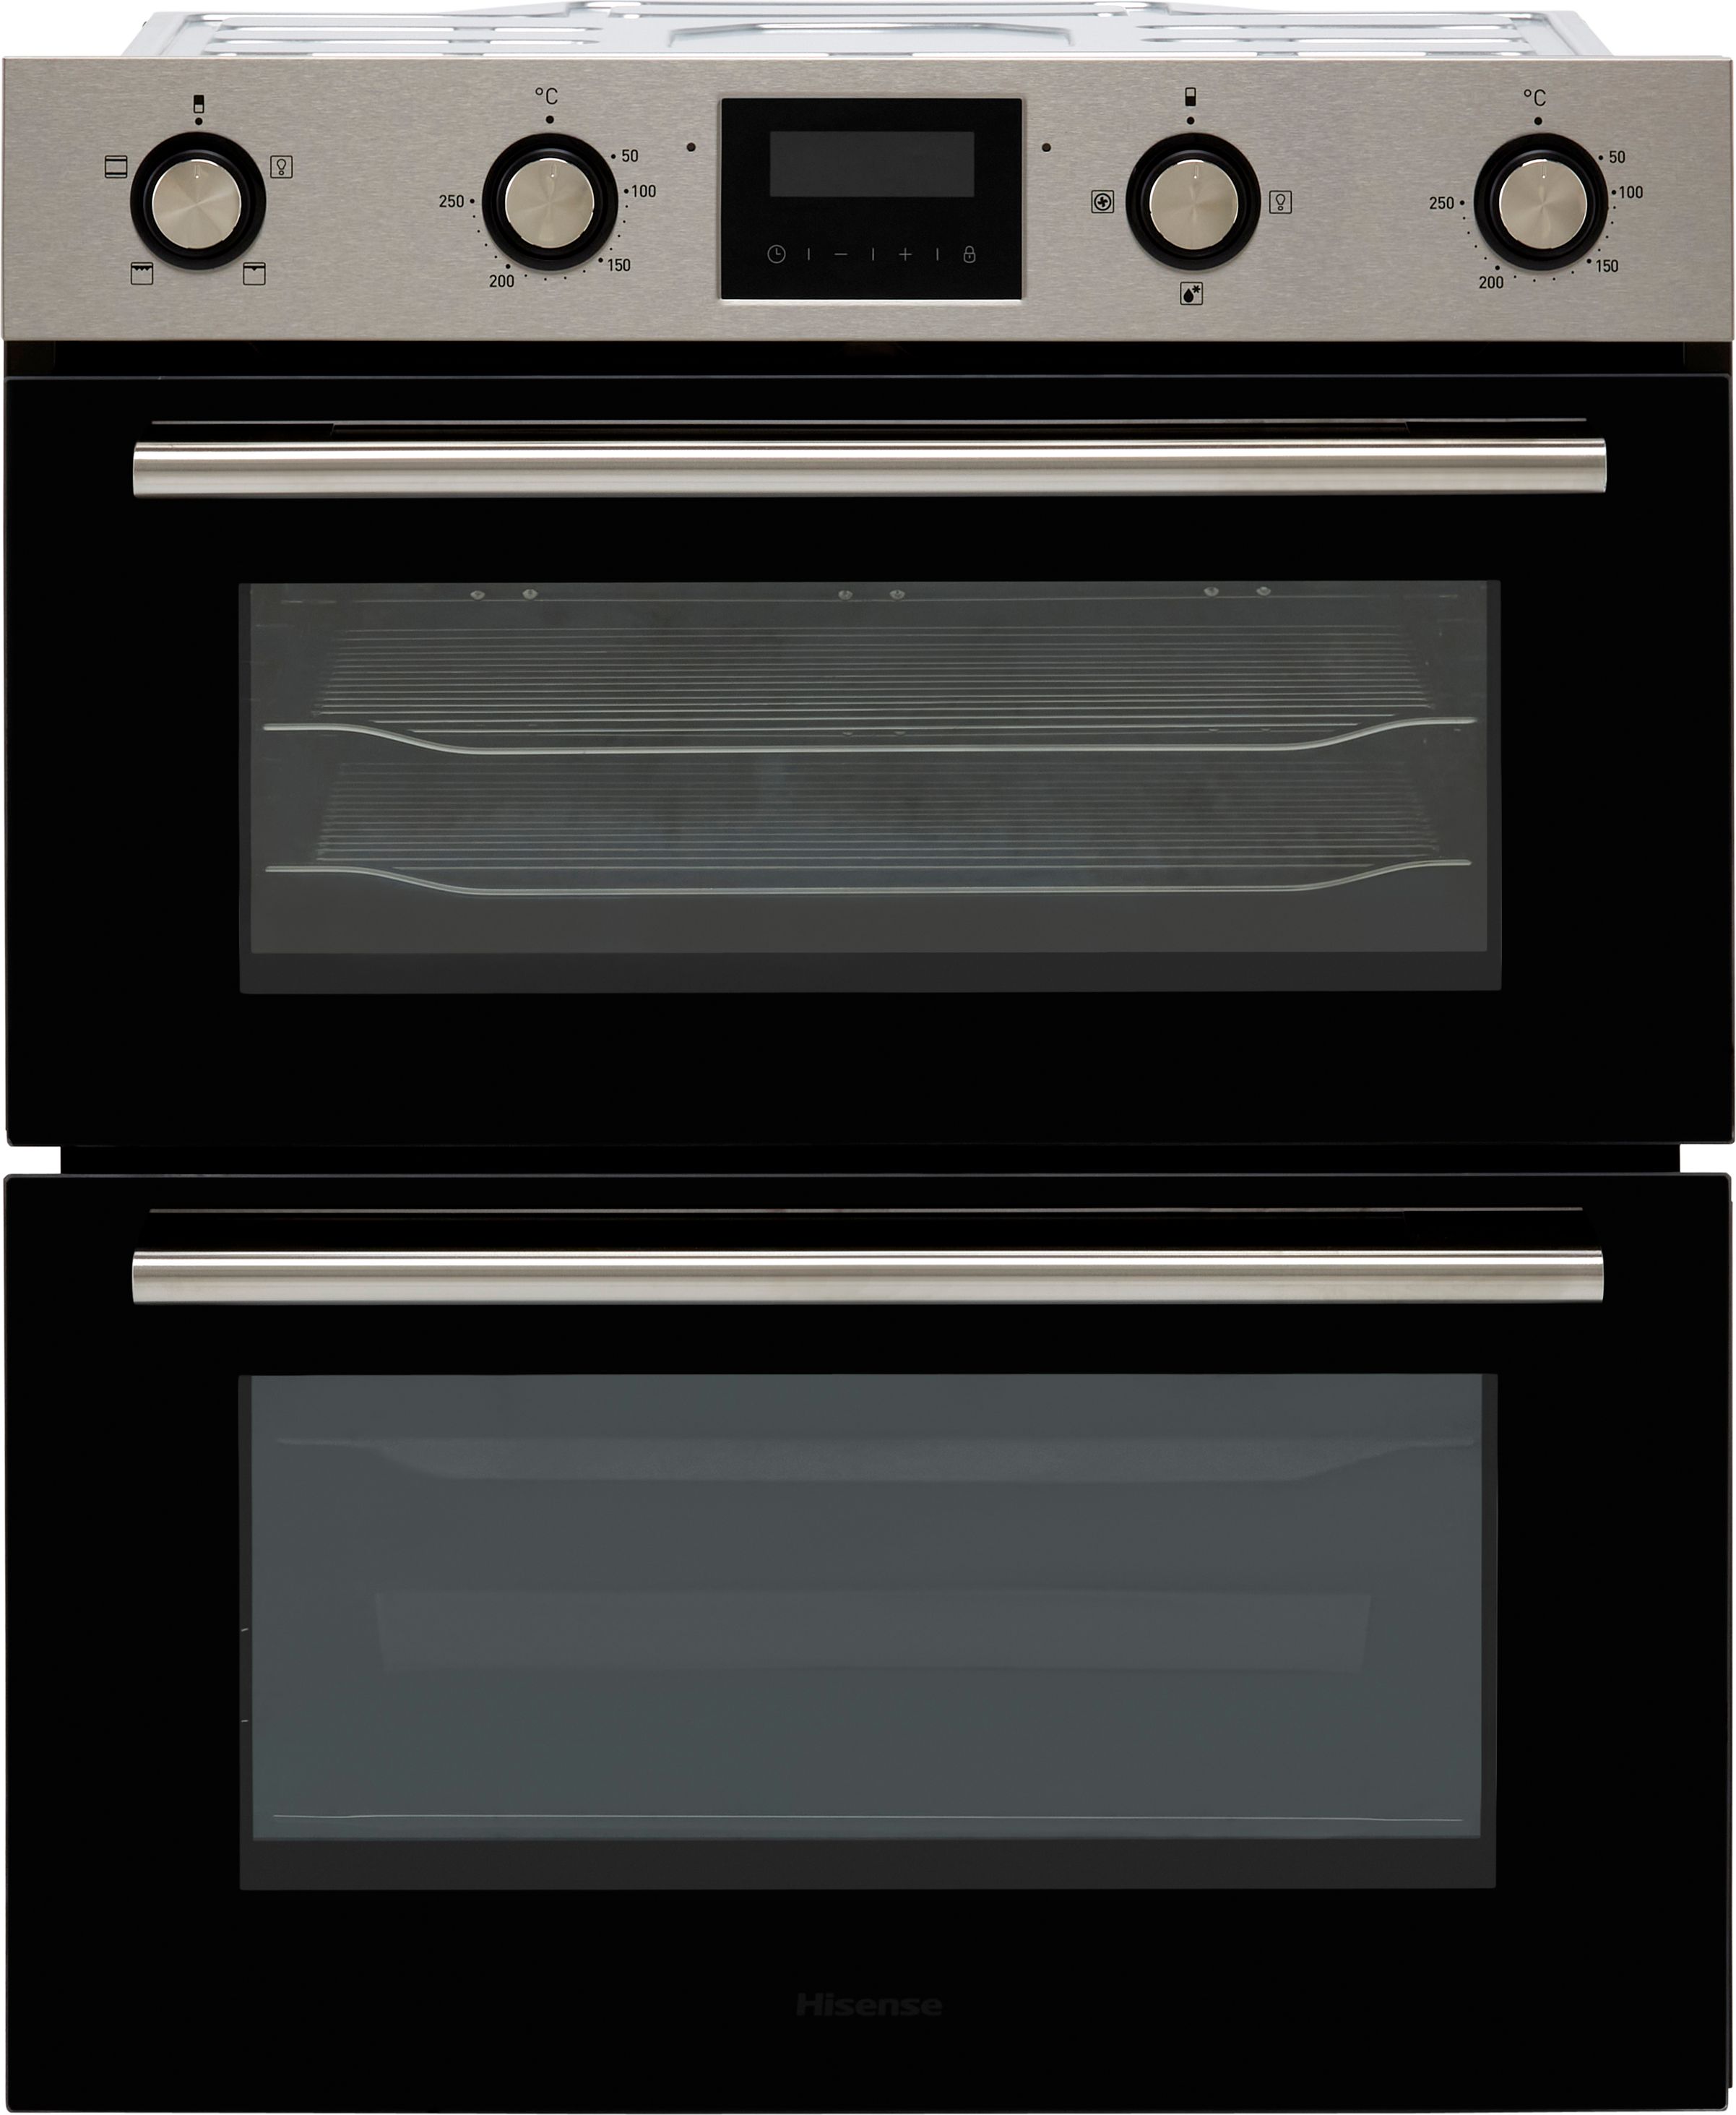 Hisense BID79222CXUK Built Under Electric Double Oven - Stainless Steel - A/A Rated, Stainless Steel